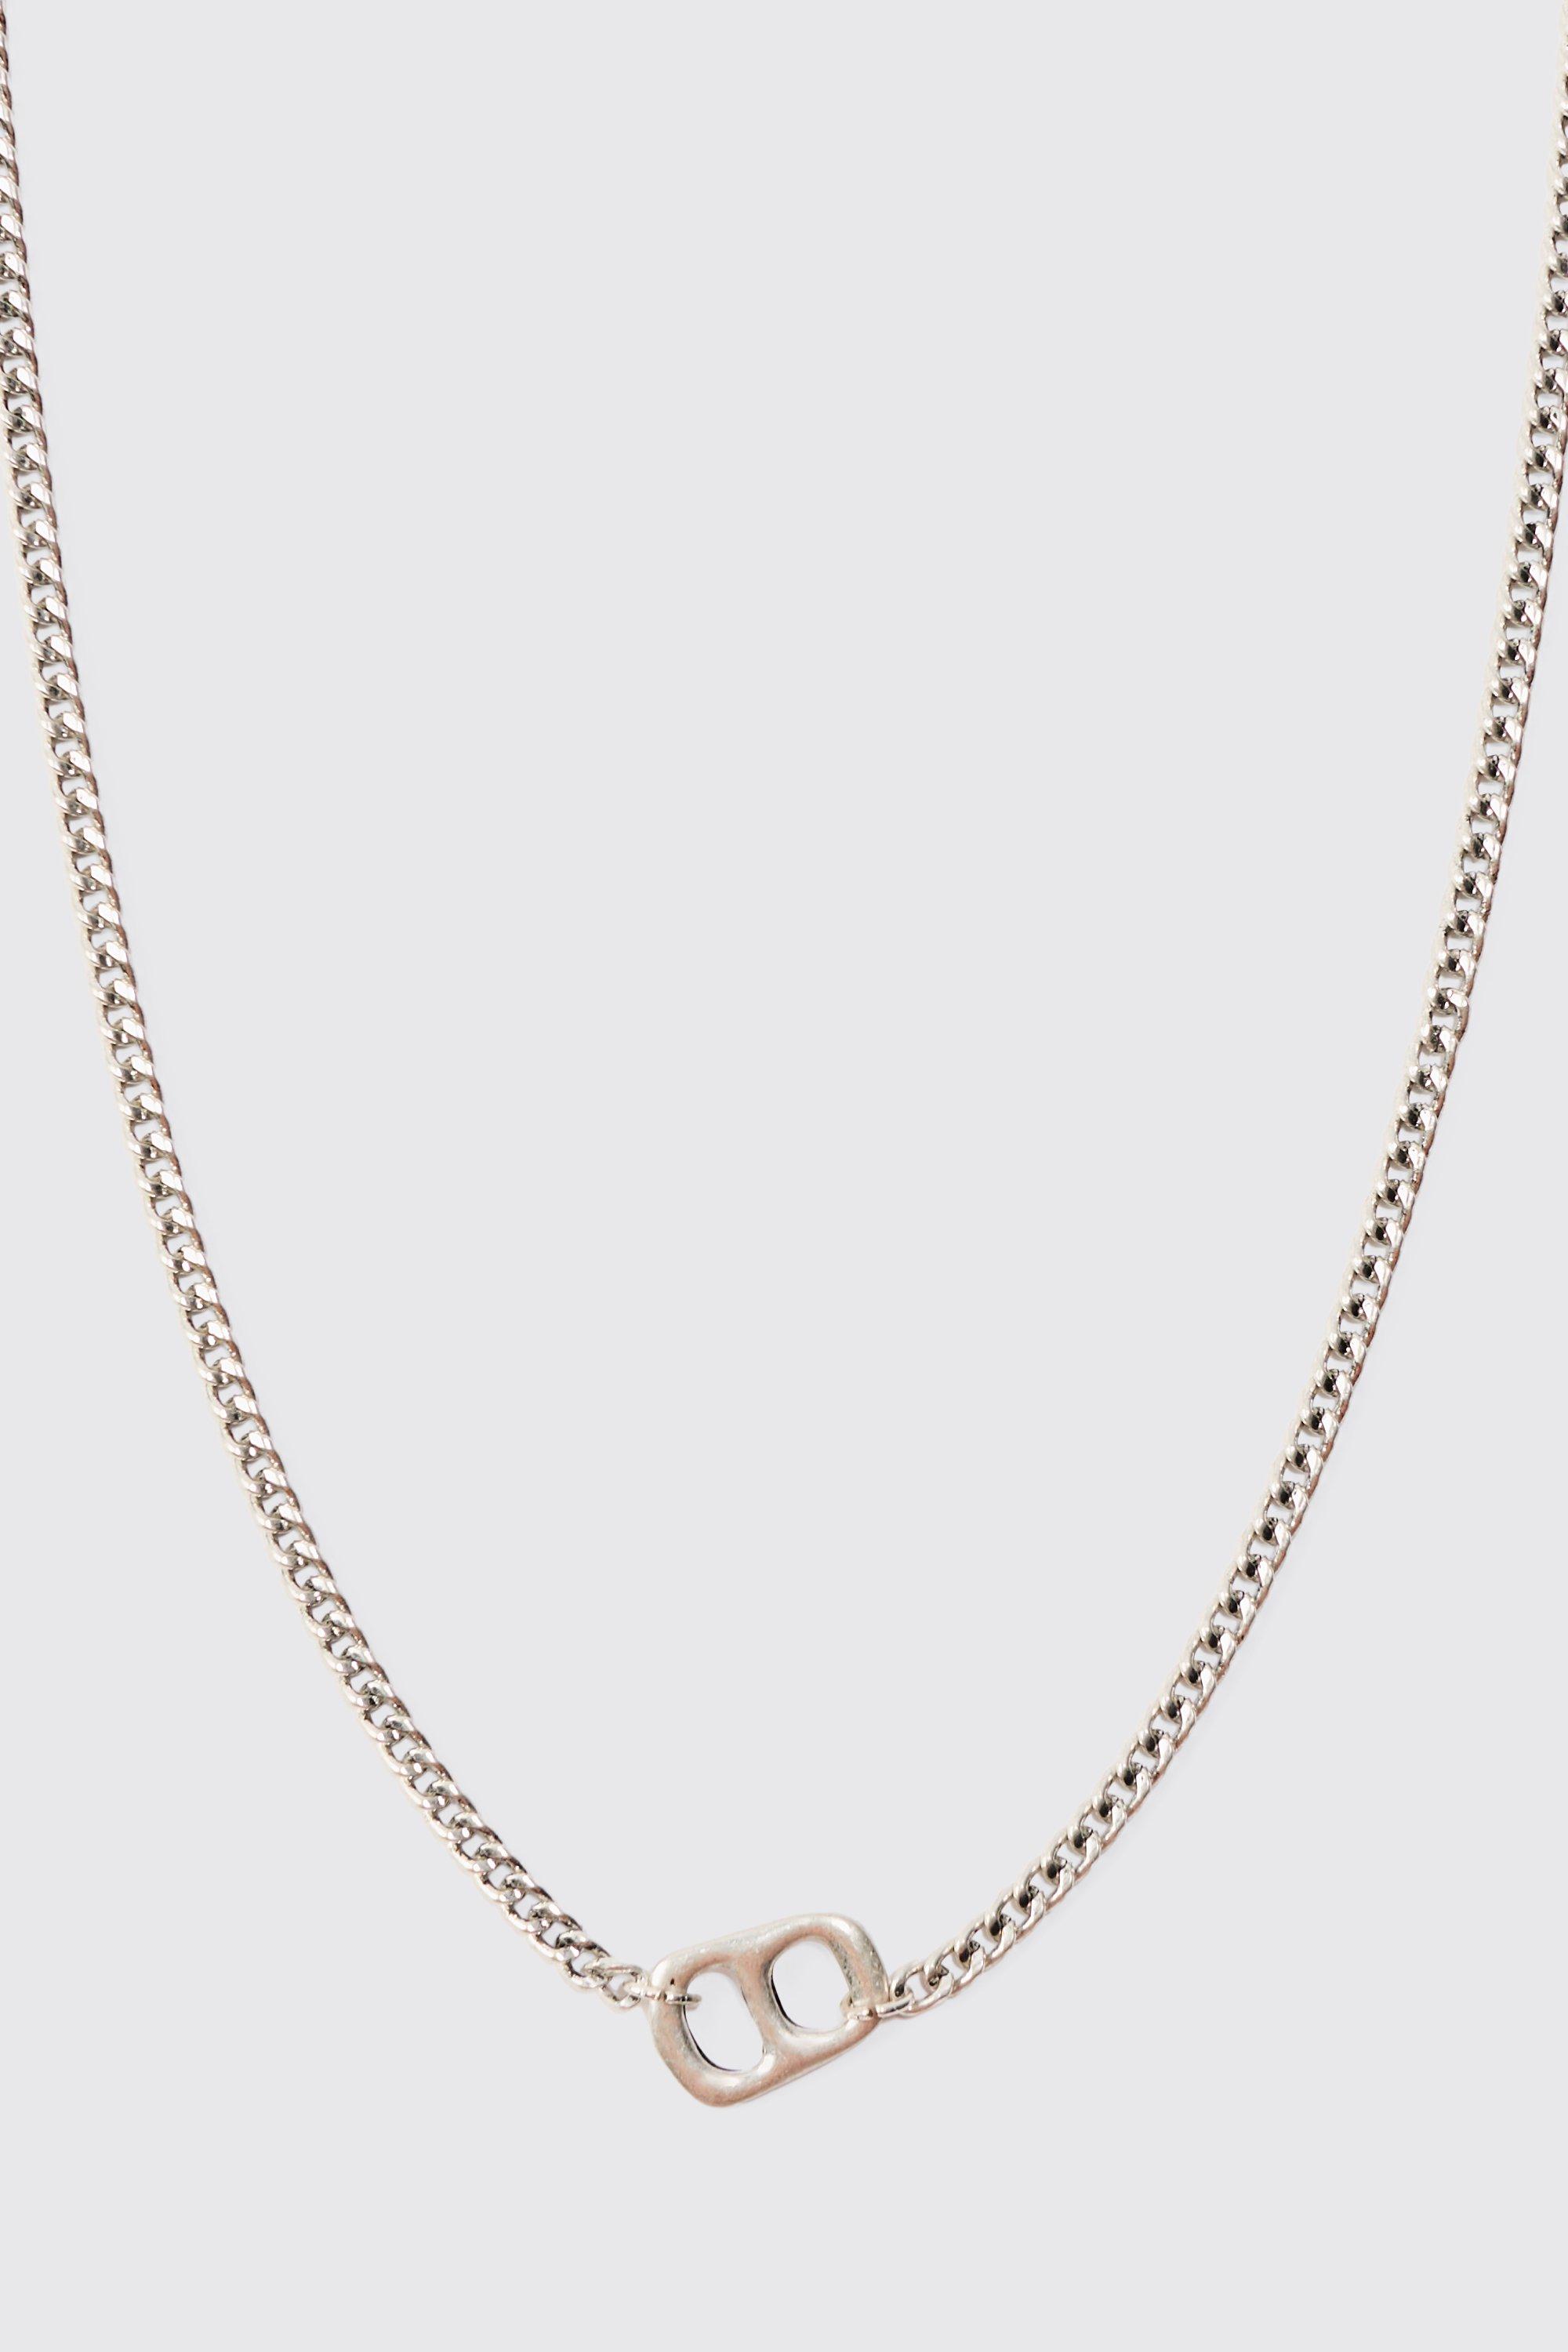 Image of Chain Detail Pendant Necklace In Silver, Grigio